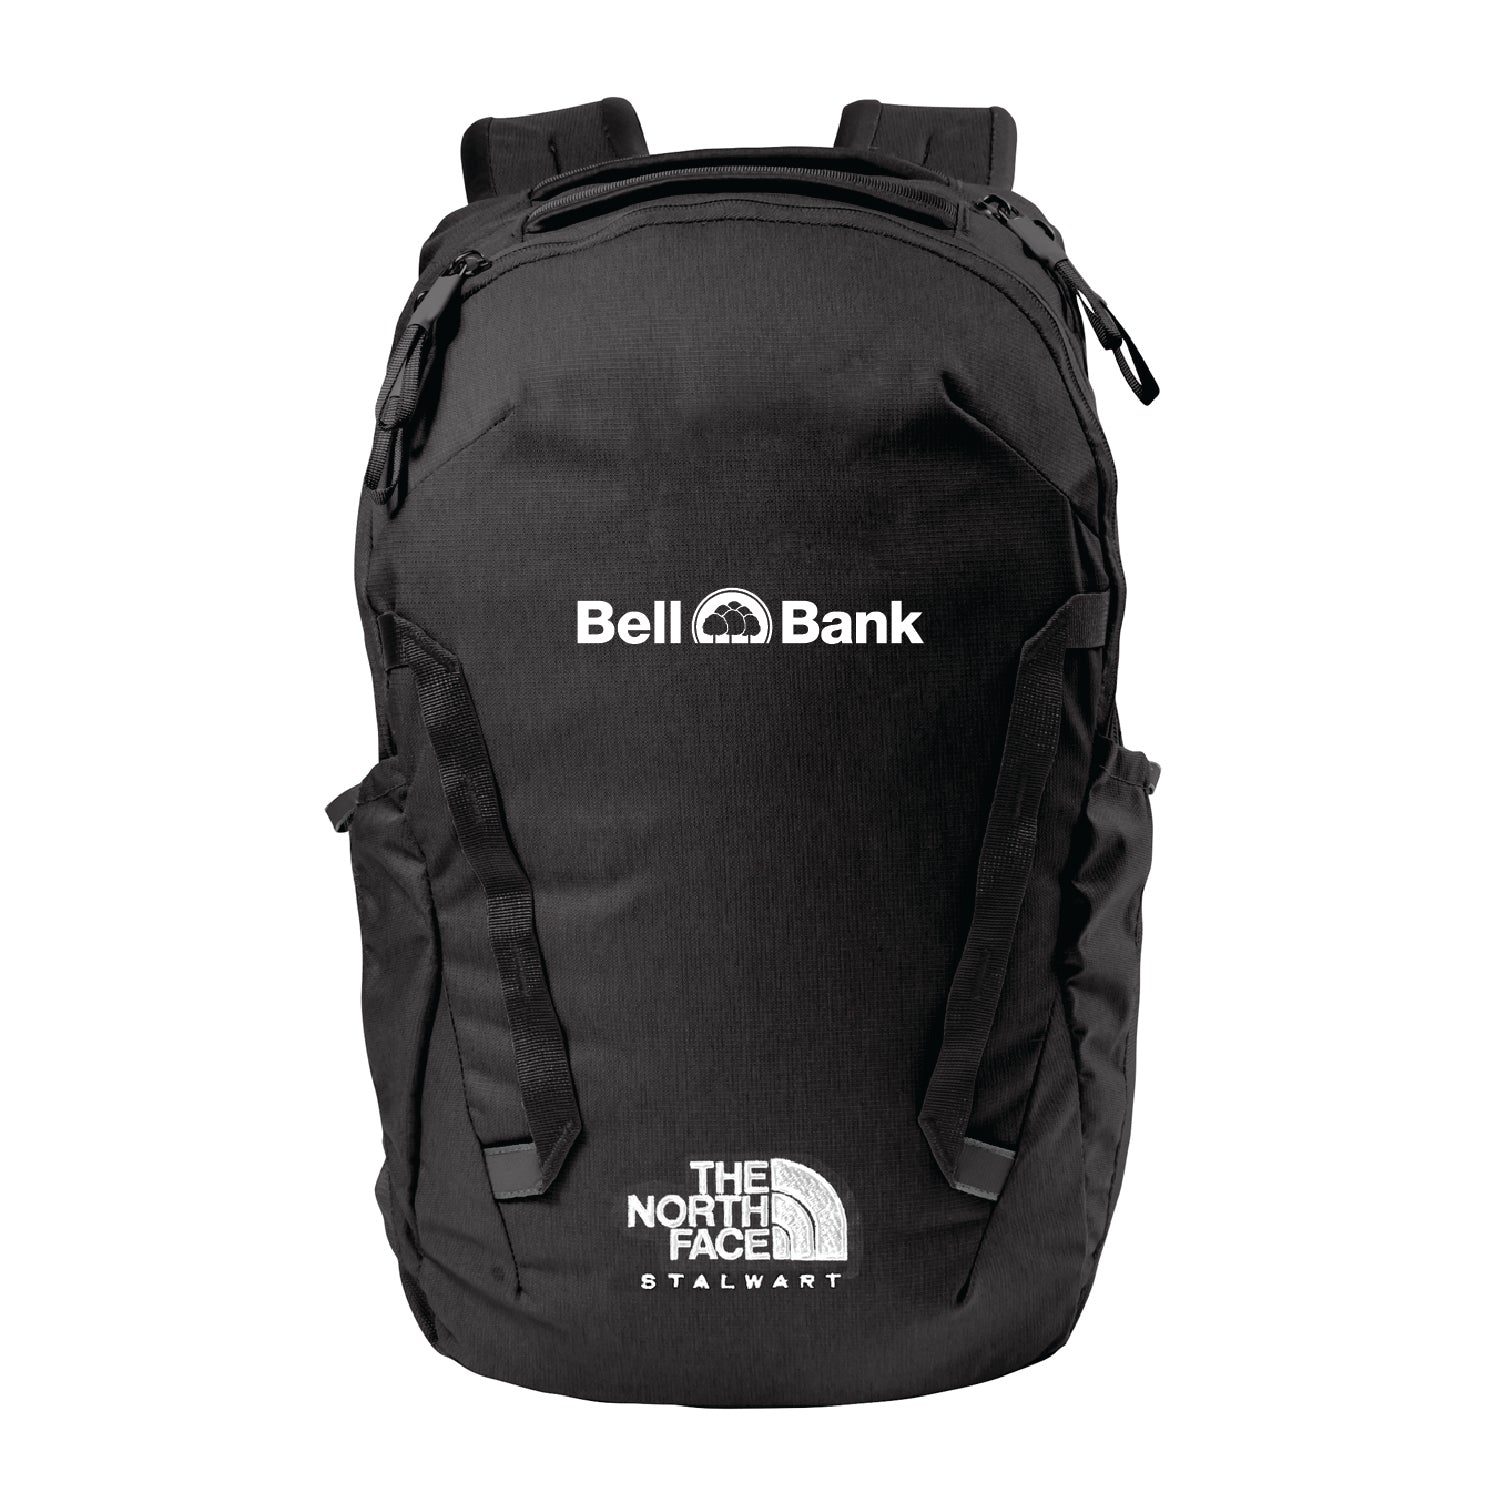 Bell Bank The North Face® Stalwart Backpack - DSP On Demand